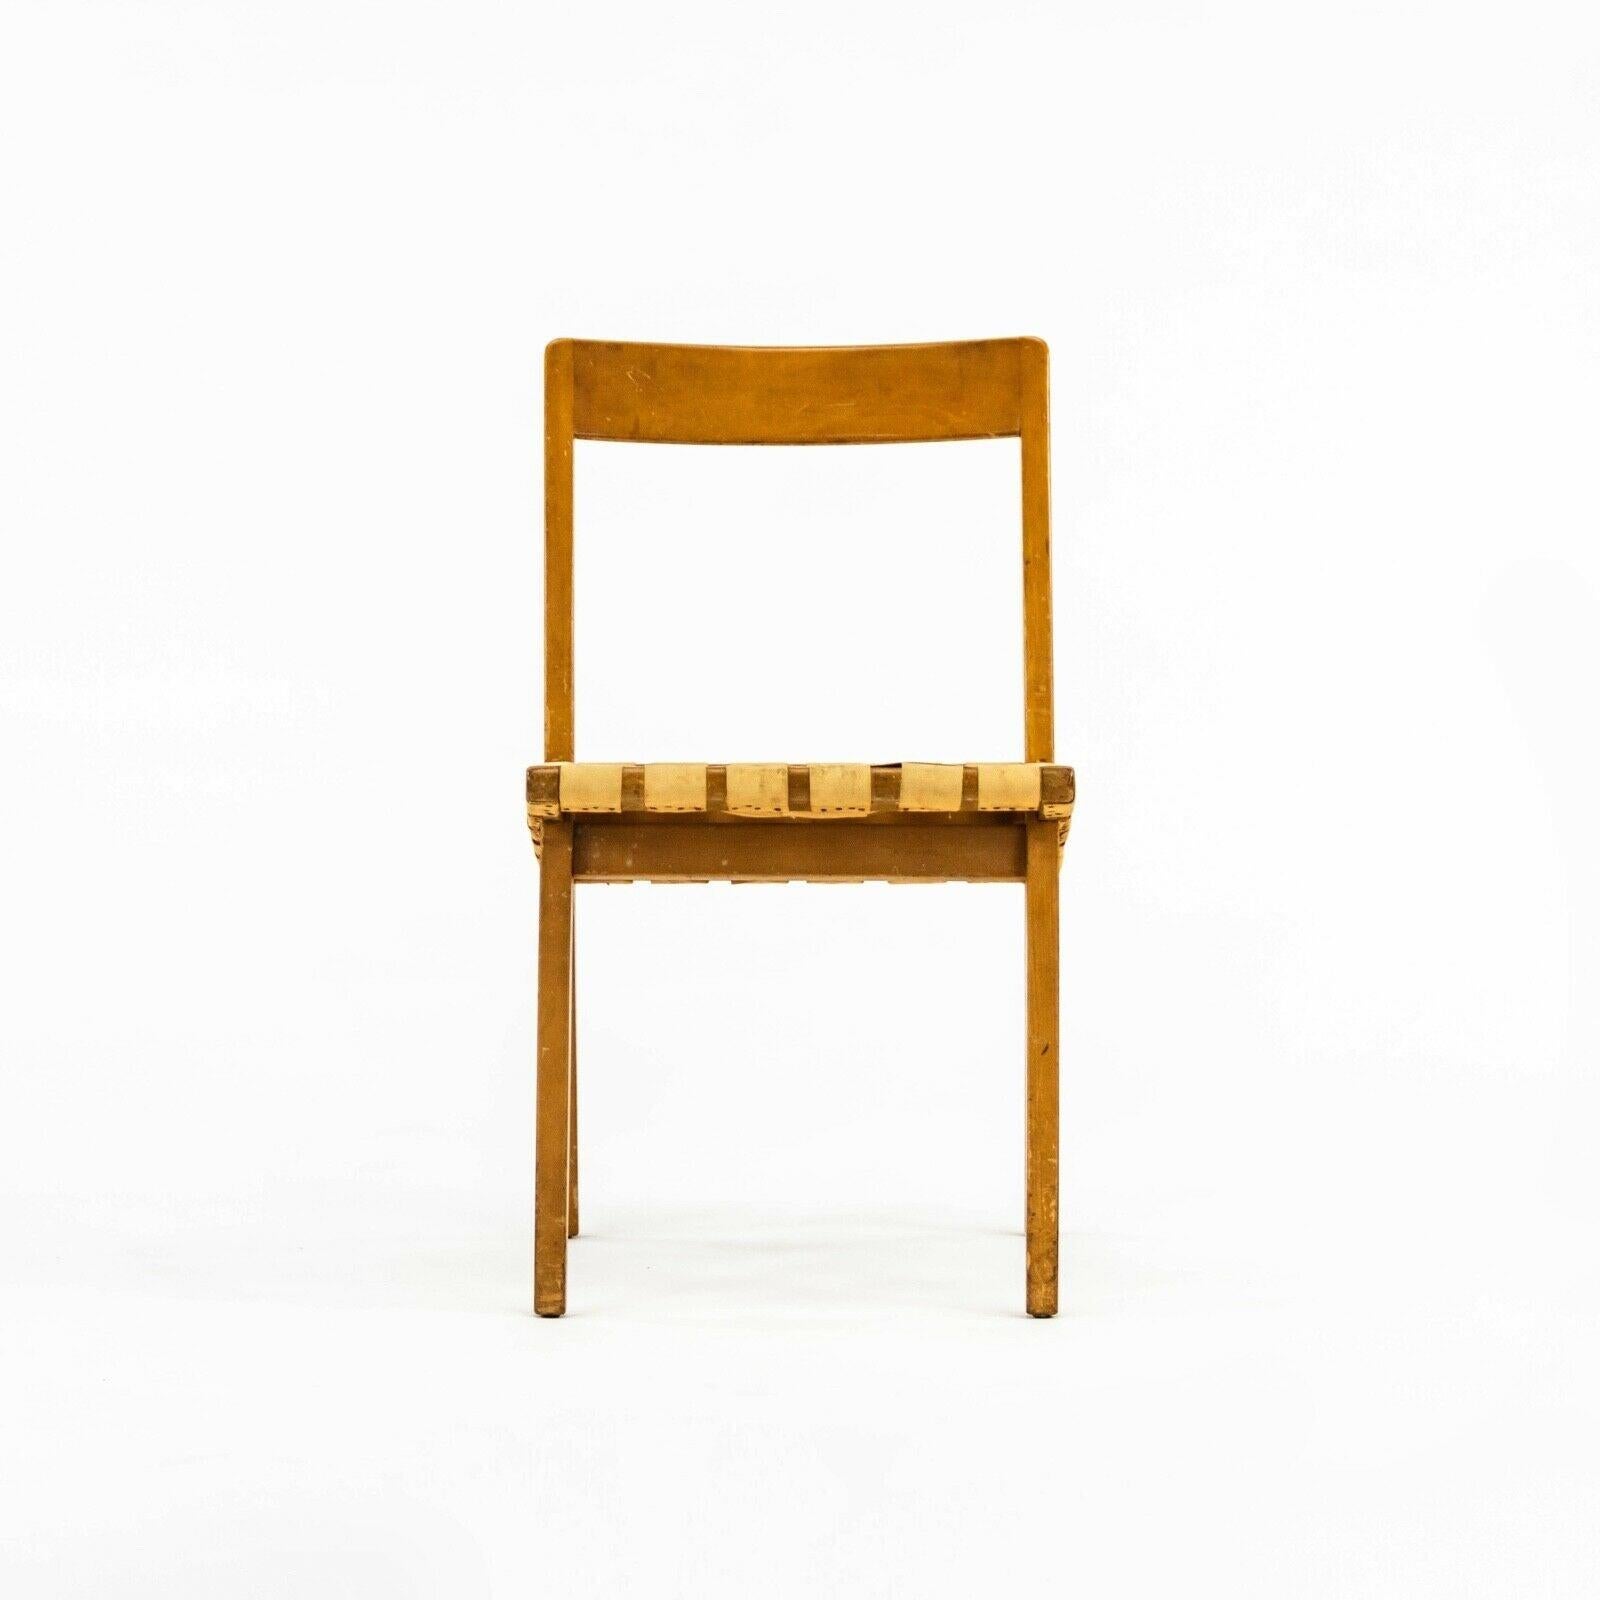 Listed for sale is an original Jens Risom for Knoll Associates 666 WSP dining chair, circa 1940s. The chair is in gorgeous original condition with some patina and wear shown to the seat. The wooden frame is in very nice condition also with some wear